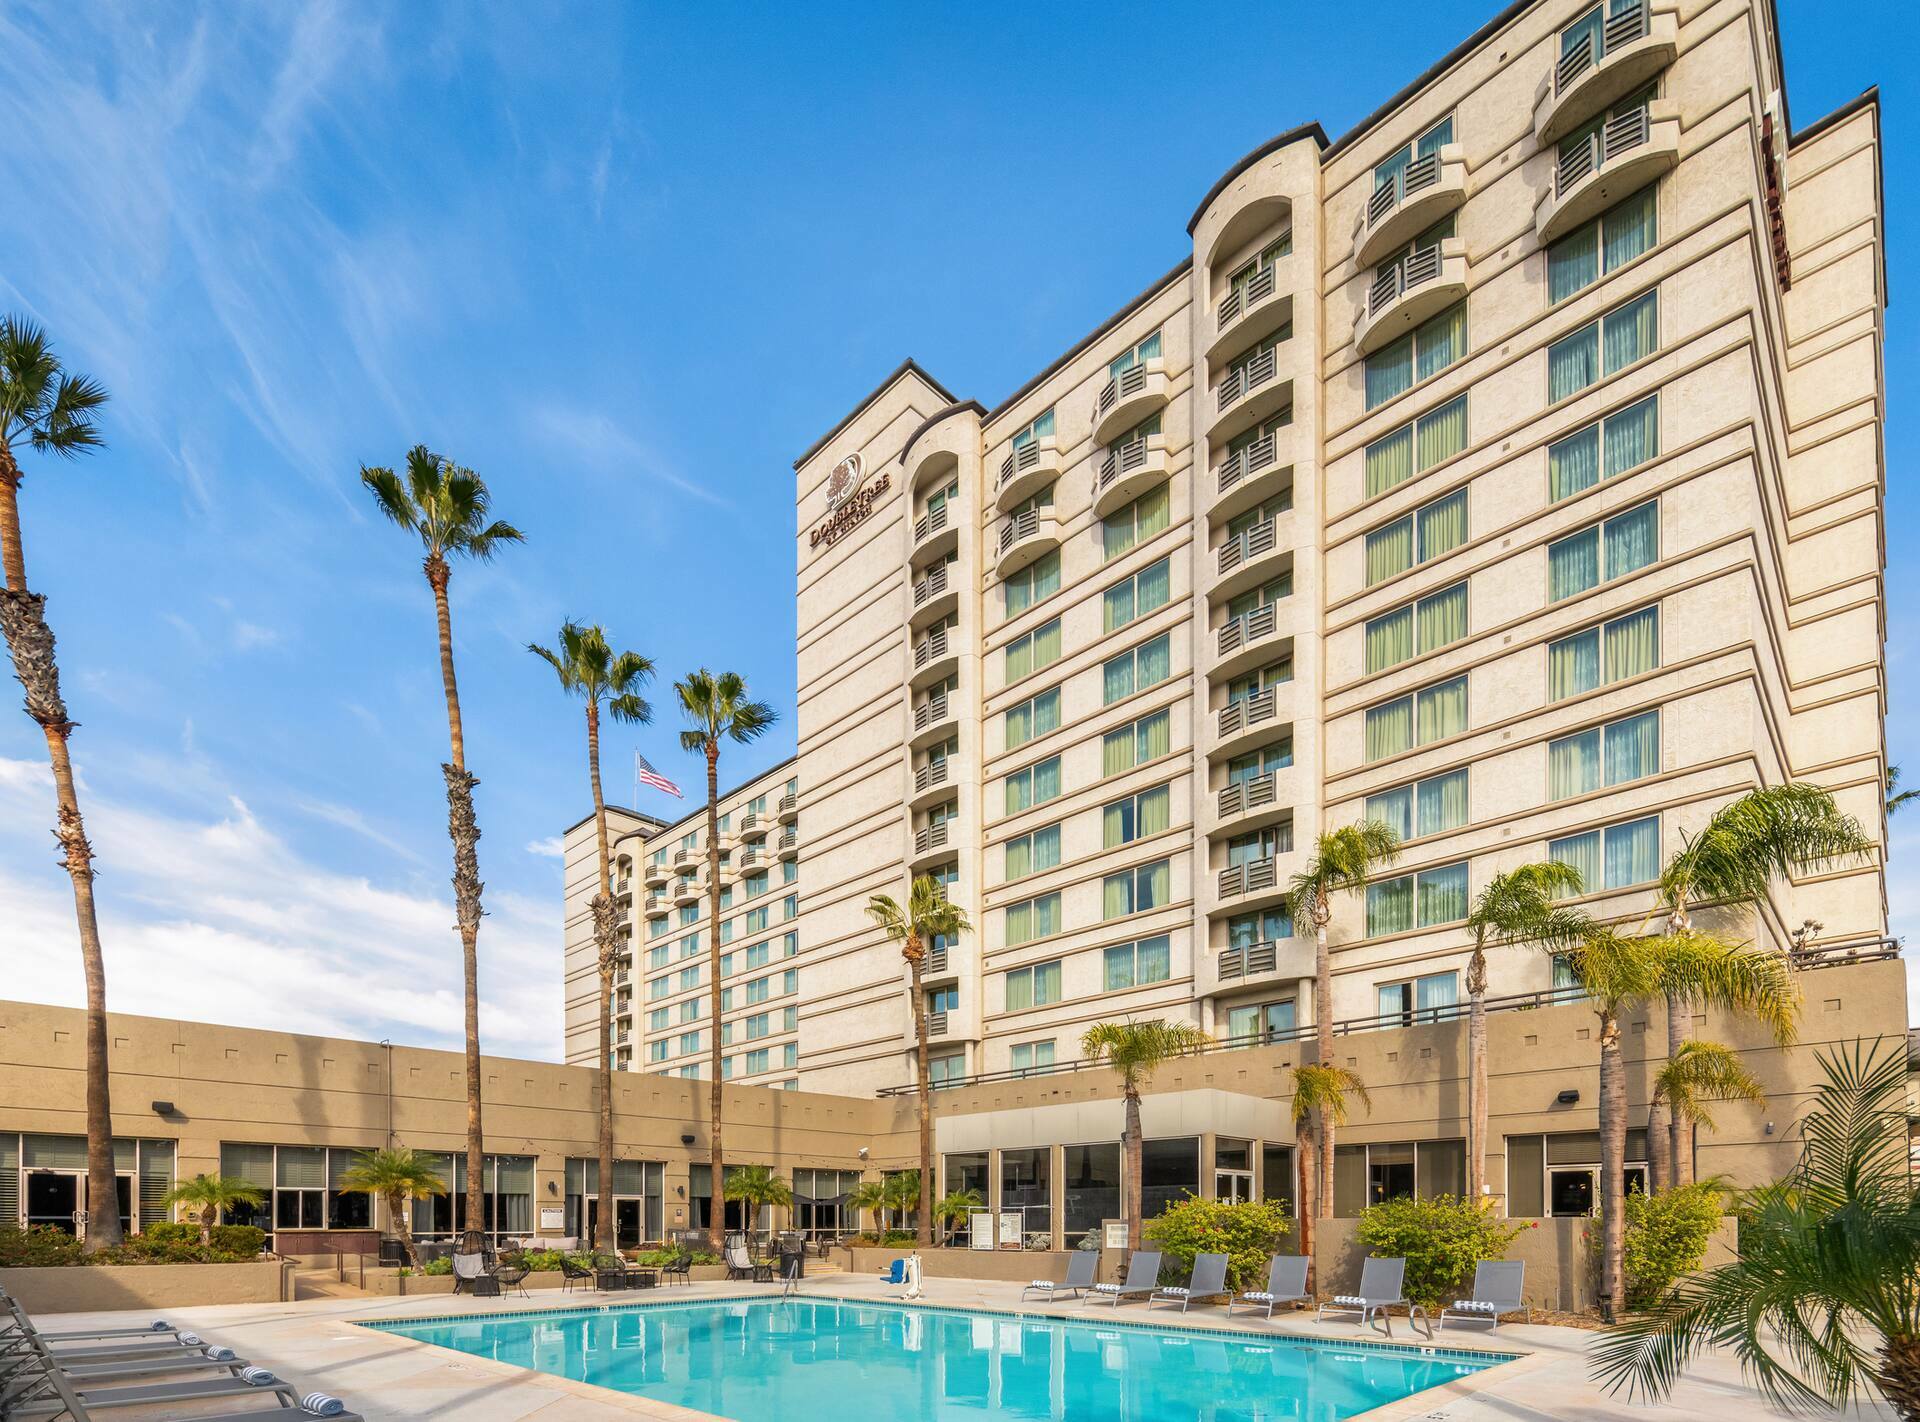 Photo of DoubleTree by Hilton Hotel San Diego - Mission Valley, San Diego, CA